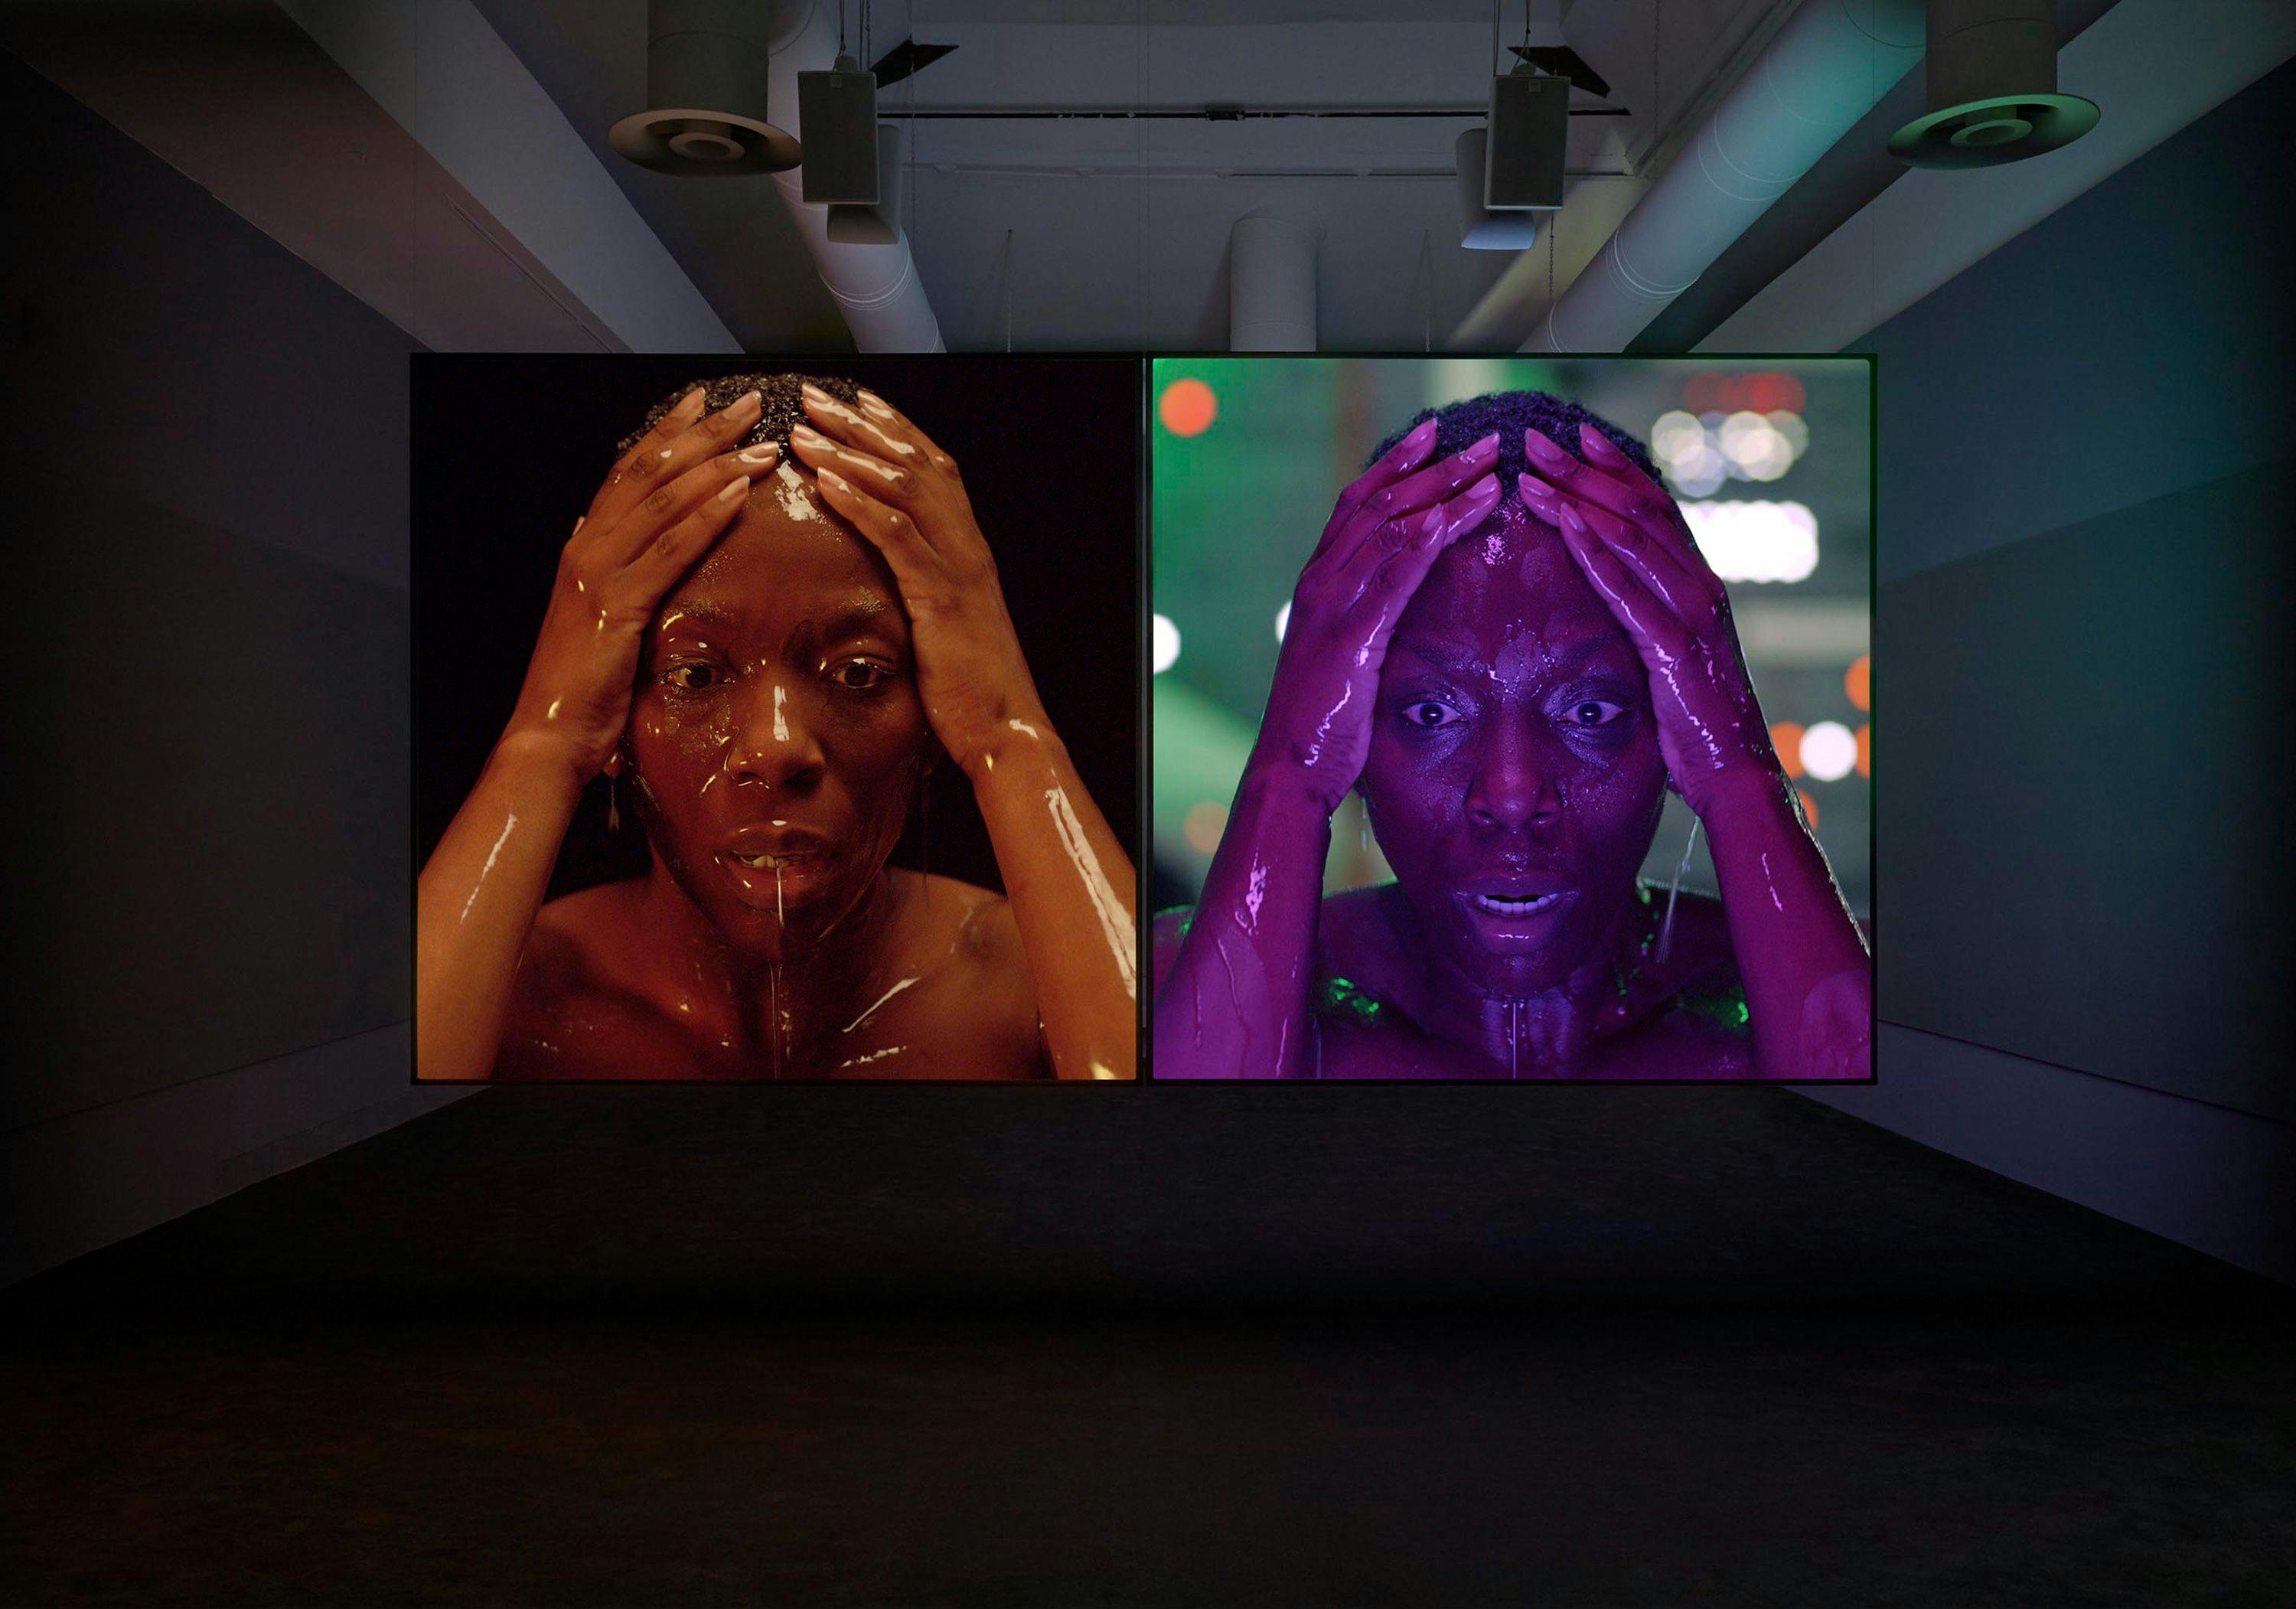 Installation view of the installation by Stan Douglas, titled Doppelgänger, at the 58th Venice Biennale, titled May You Live in Interesting Times, dated 2019